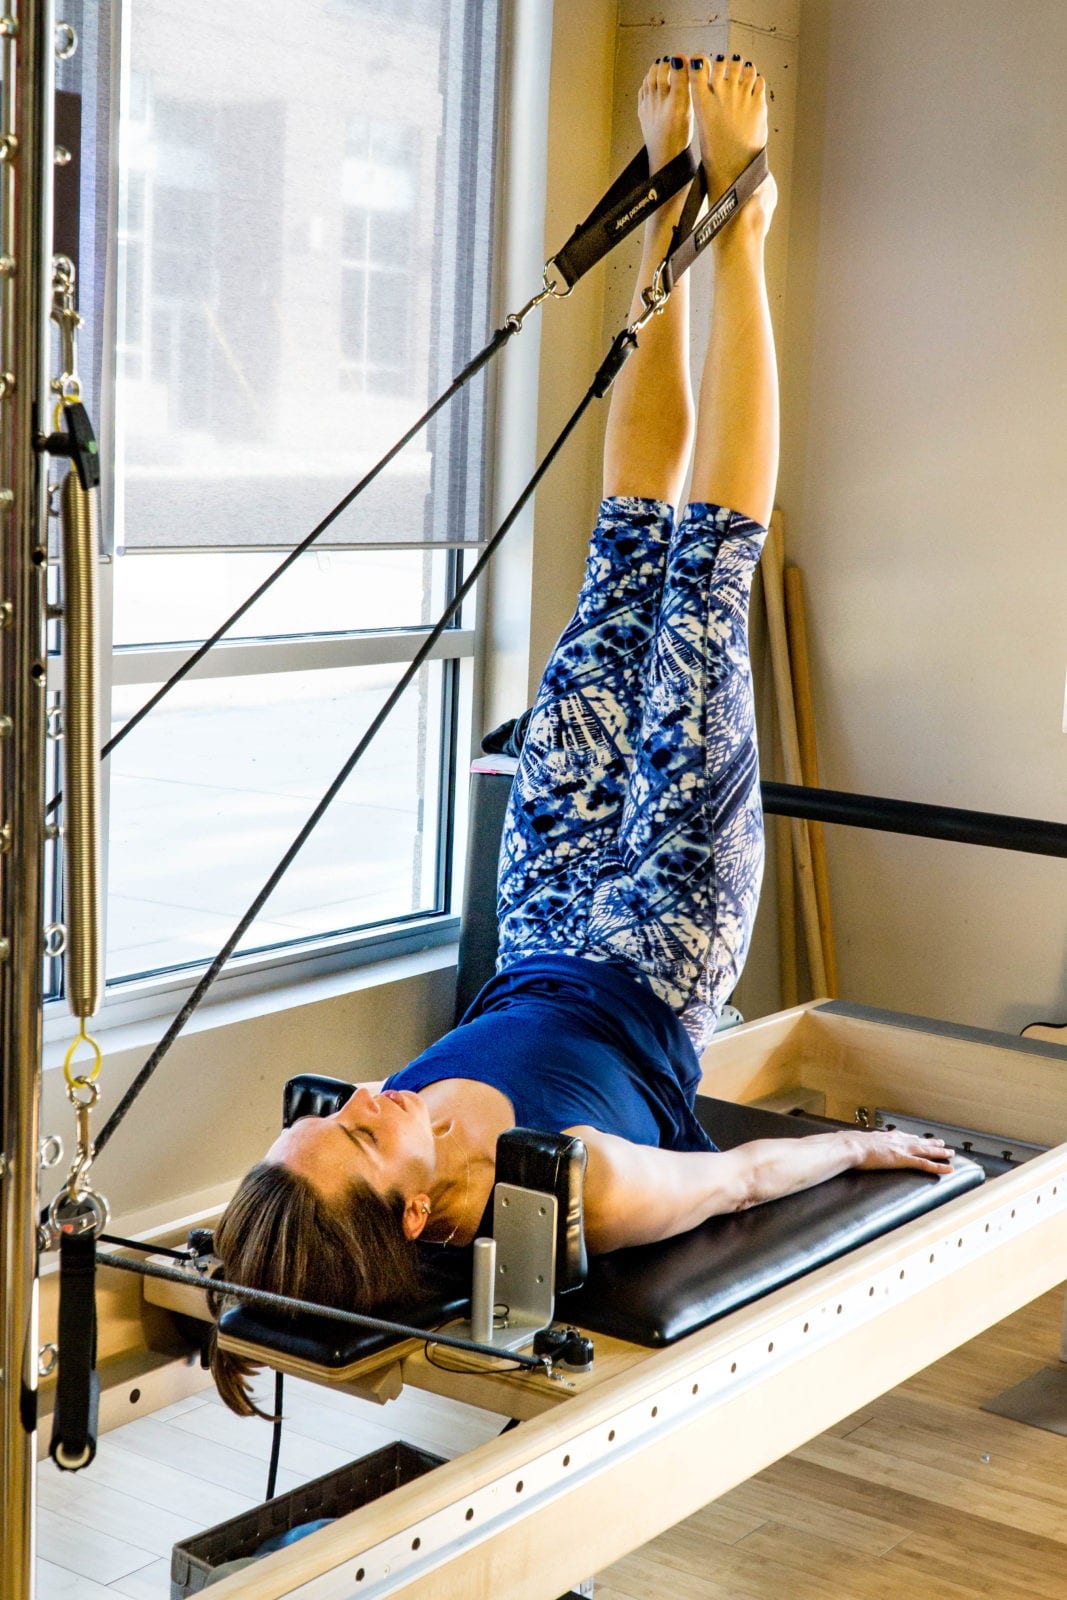 Change it up: Flex Different Muscles in Your Pilates Routine